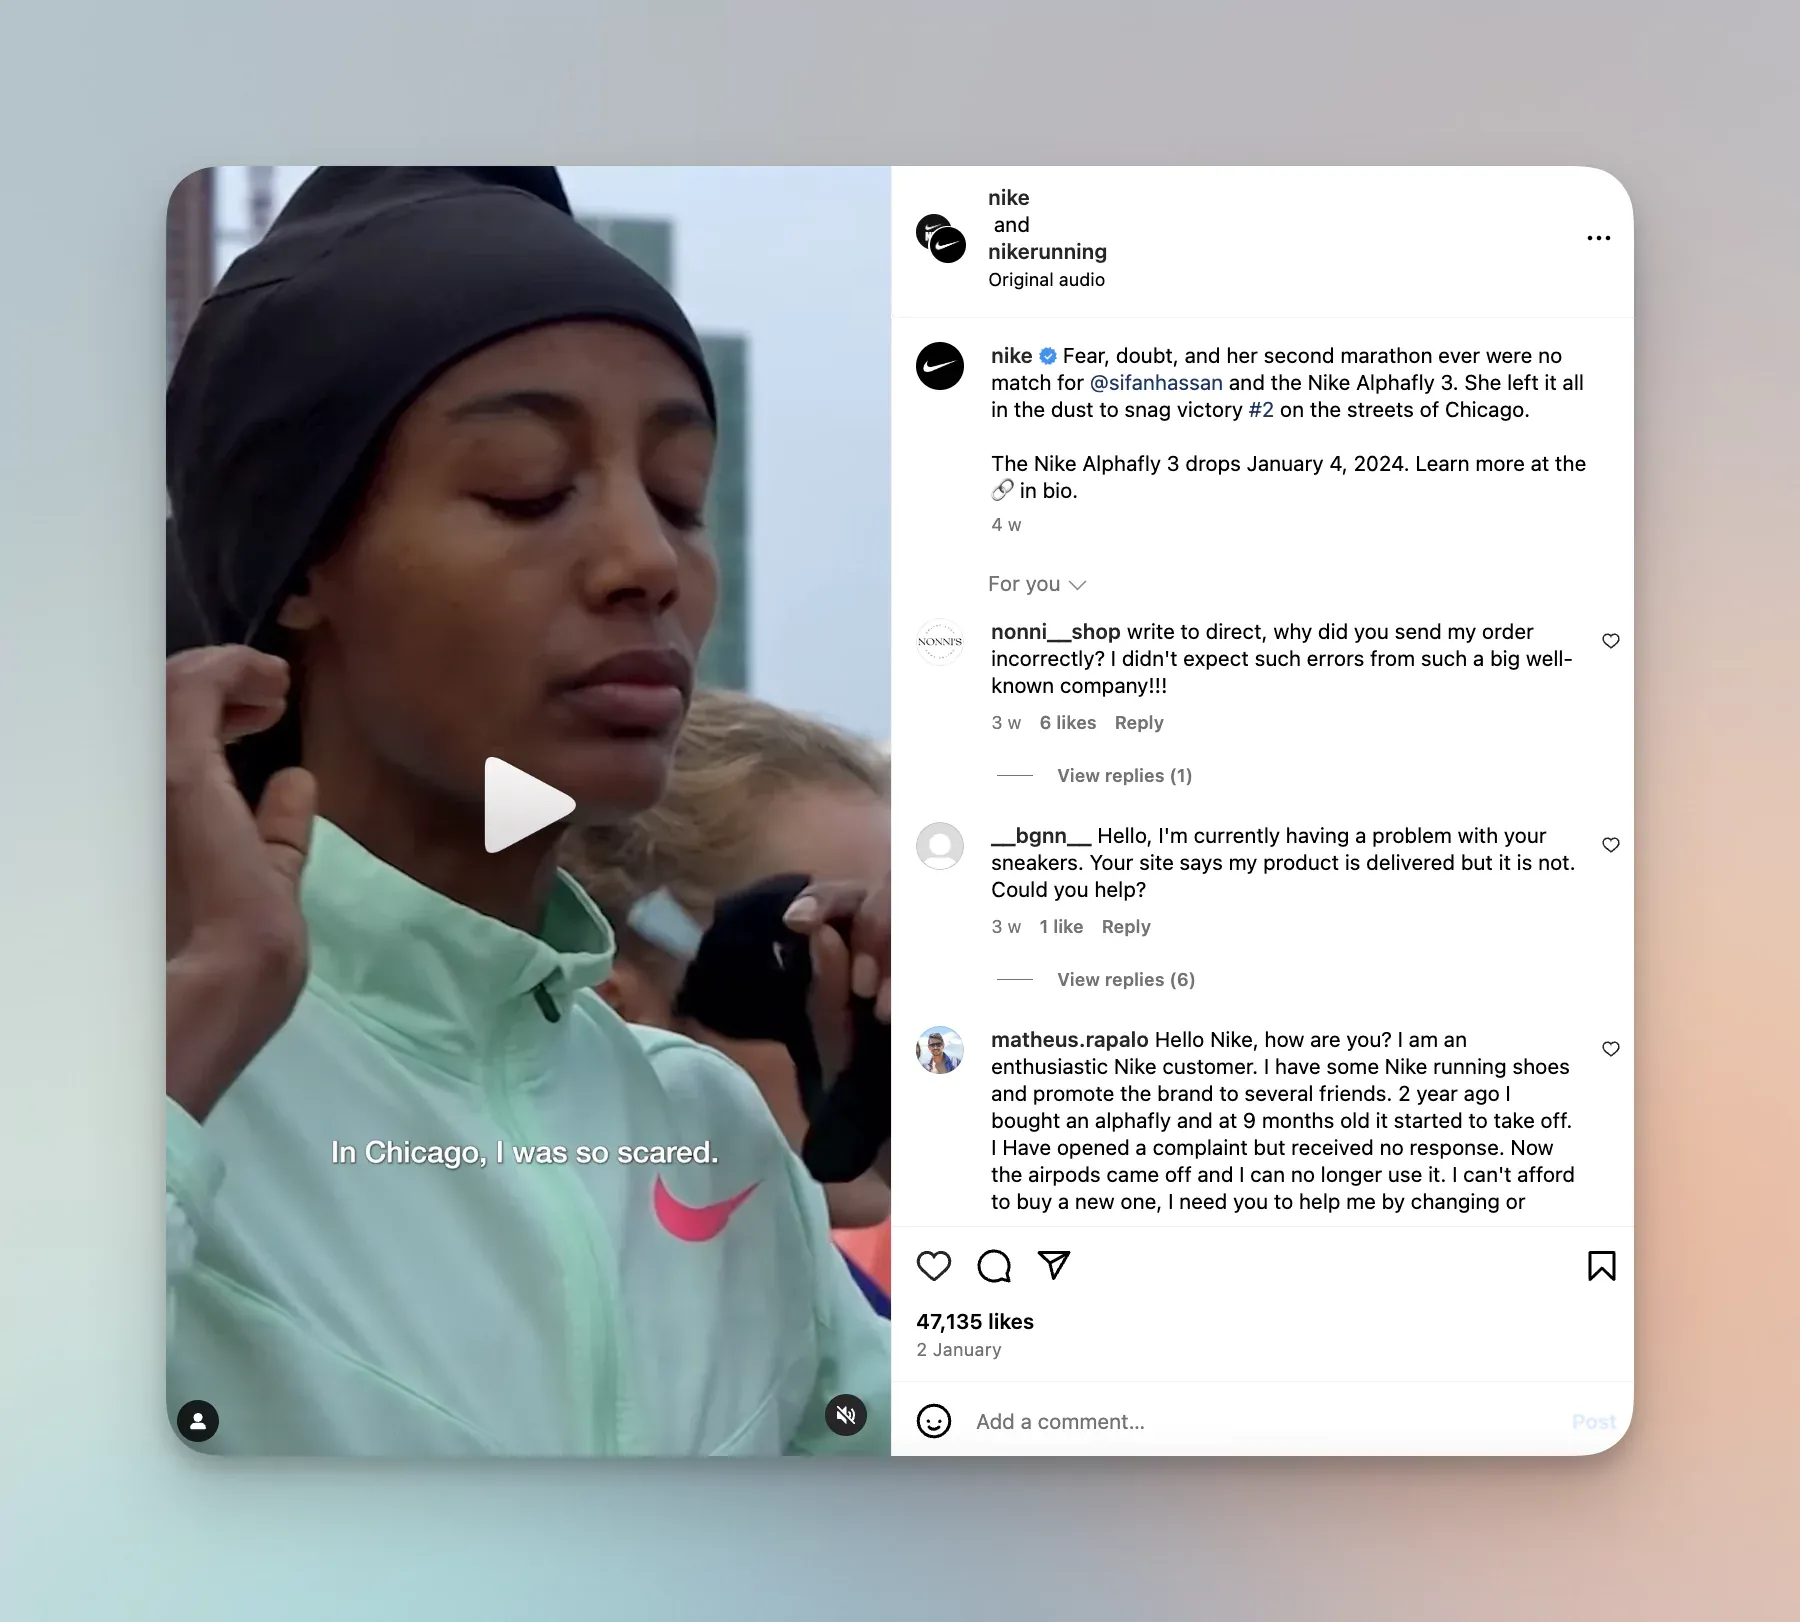 Here is an example of a social media post depicting one of Nike's content pillars for social media